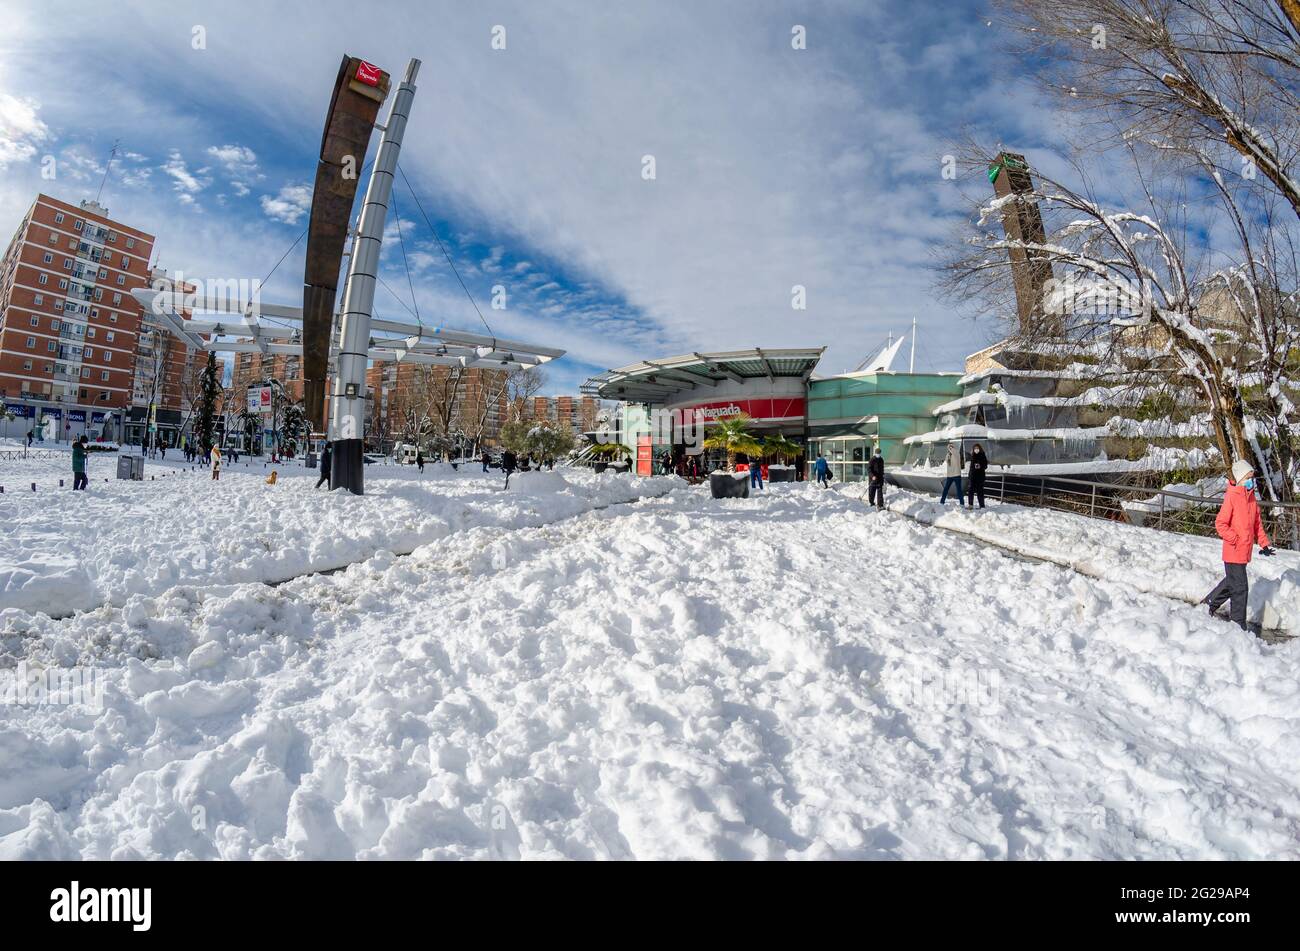 MADRID, SPAIN – JANUARY 10, 2021: La Vaguada Shopping Center seen after  Storm “Filomena”, the heaviest snowfall in 50 years in Madrid, Spain Stock  Photo - Alamy